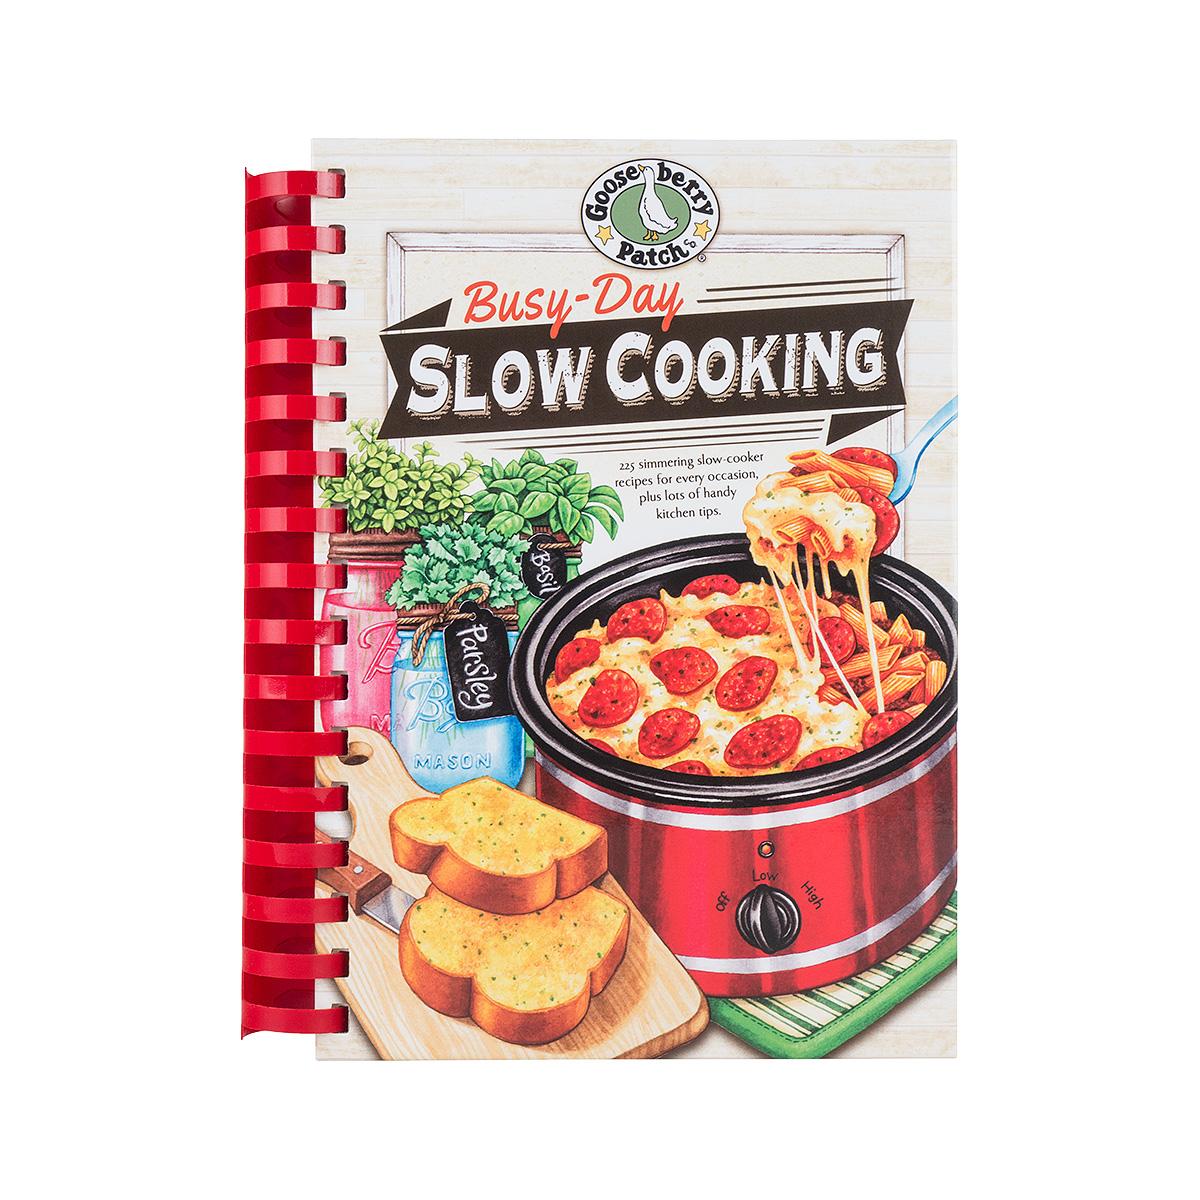  Busy- Day Slow Cooking Cookbook